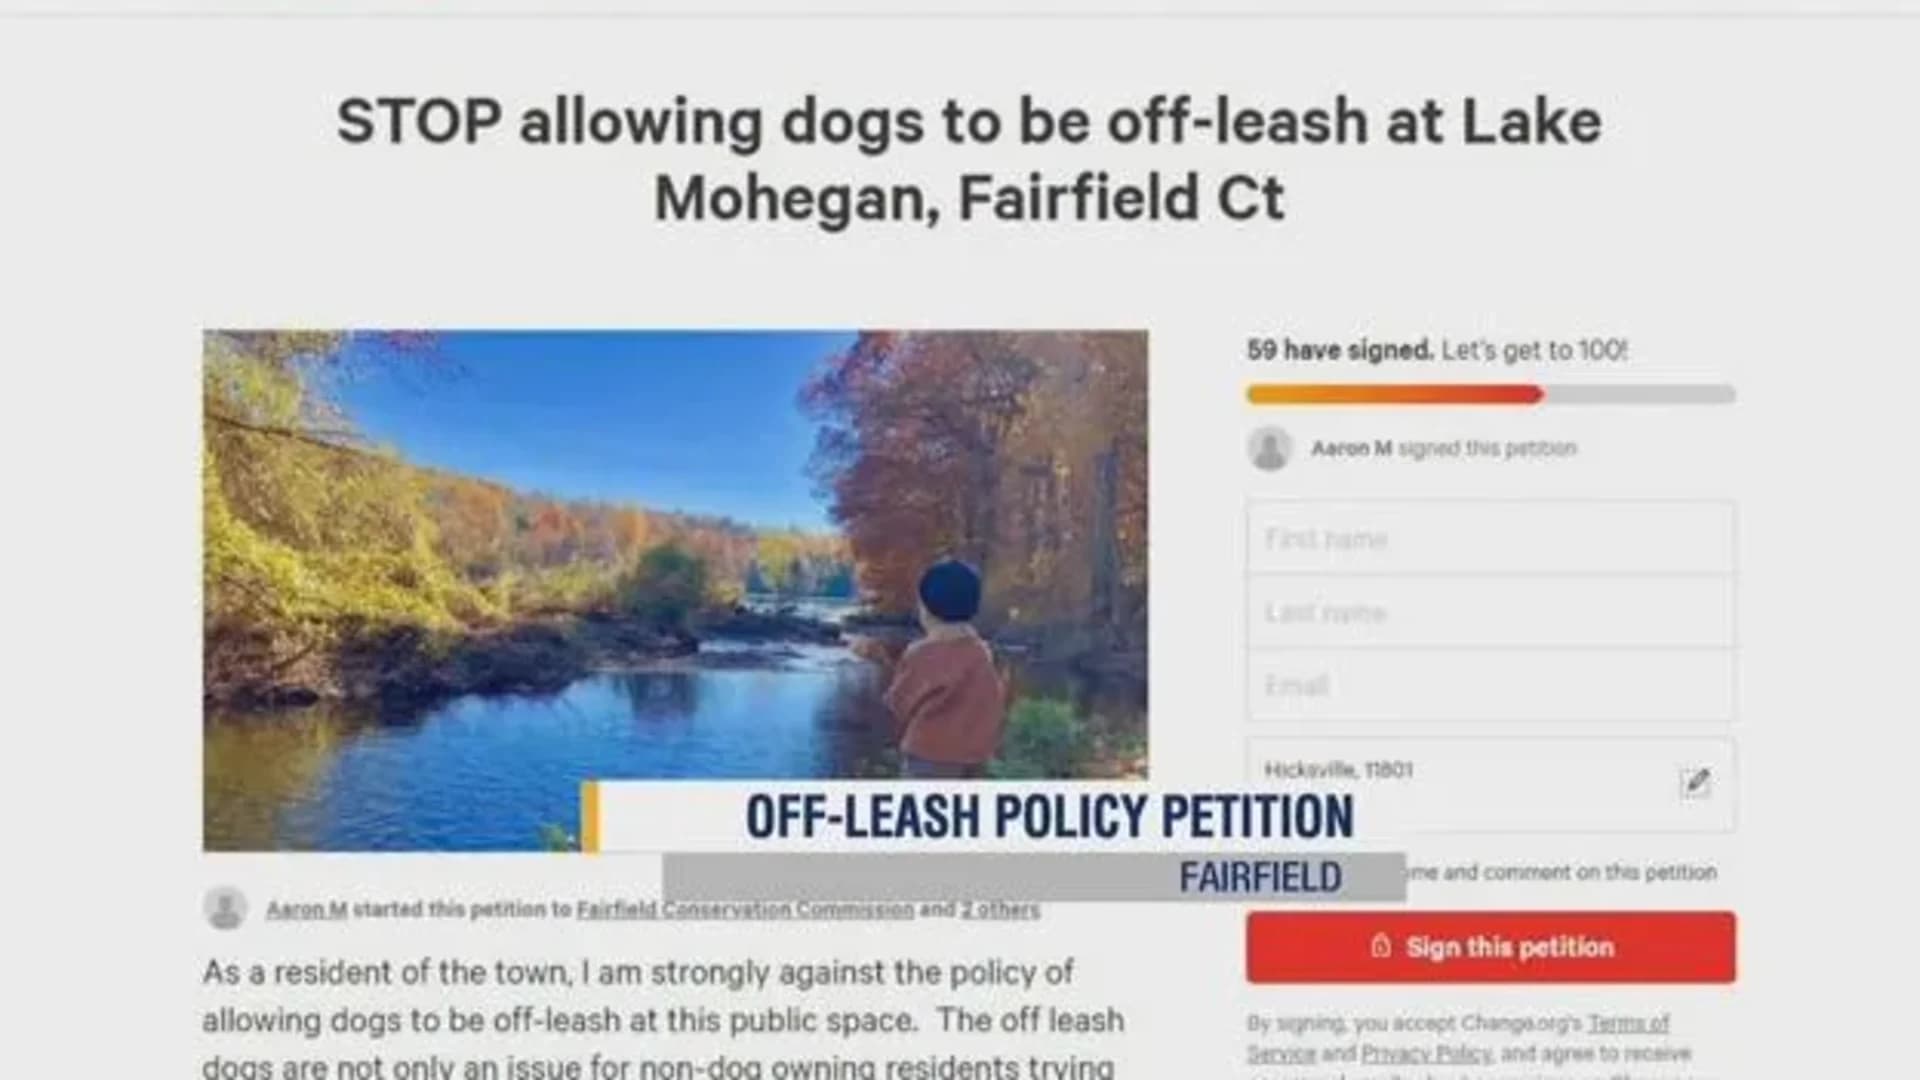 Online petition calls to ban off-leash dogs at Lake Mohegan in Fairfield